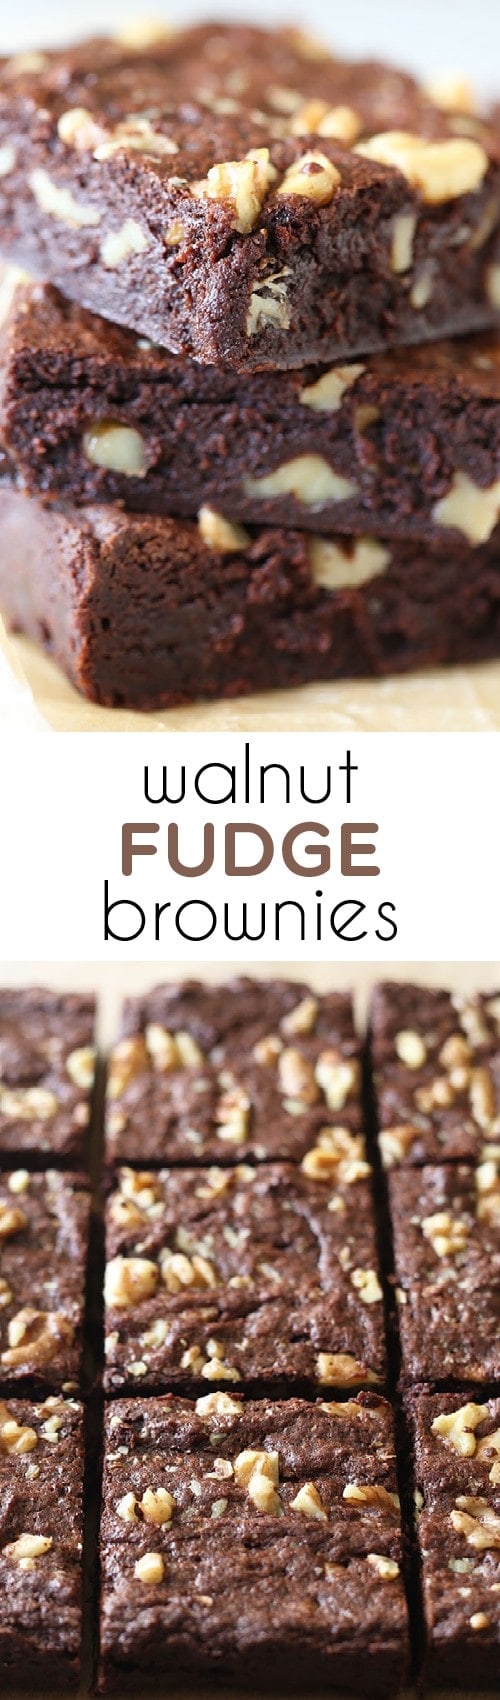 Our new GO-TO brownie recipe!! So much better than box mix brownies, but practically as easy! Walnut Fudge Brownies.